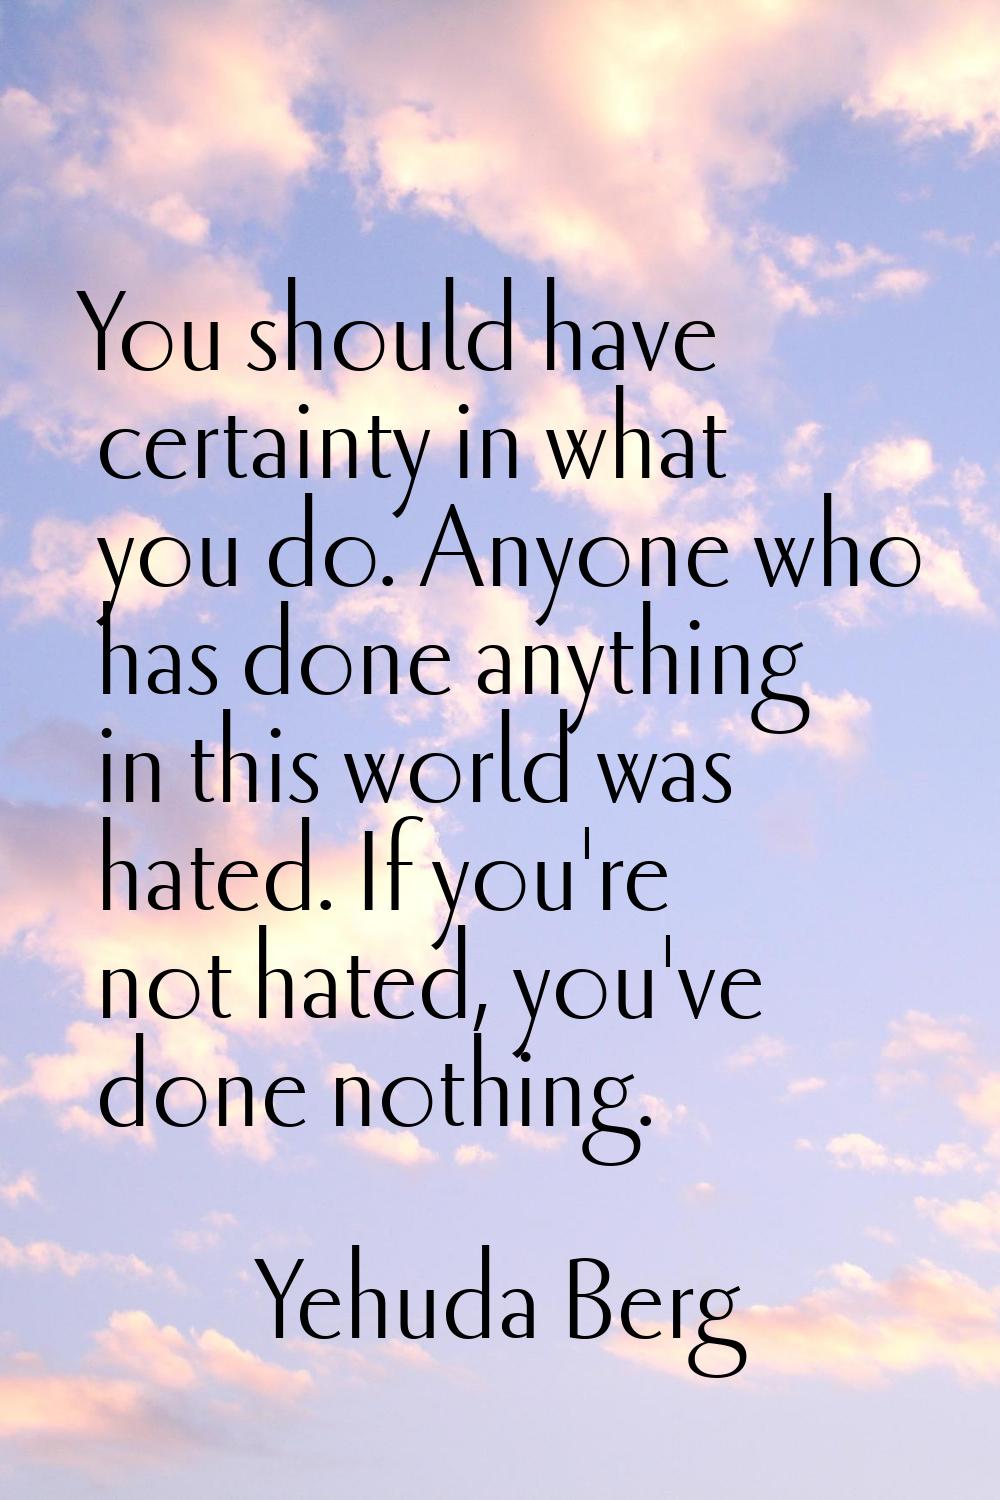 You should have certainty in what you do. Anyone who has done anything in this world was hated. If 